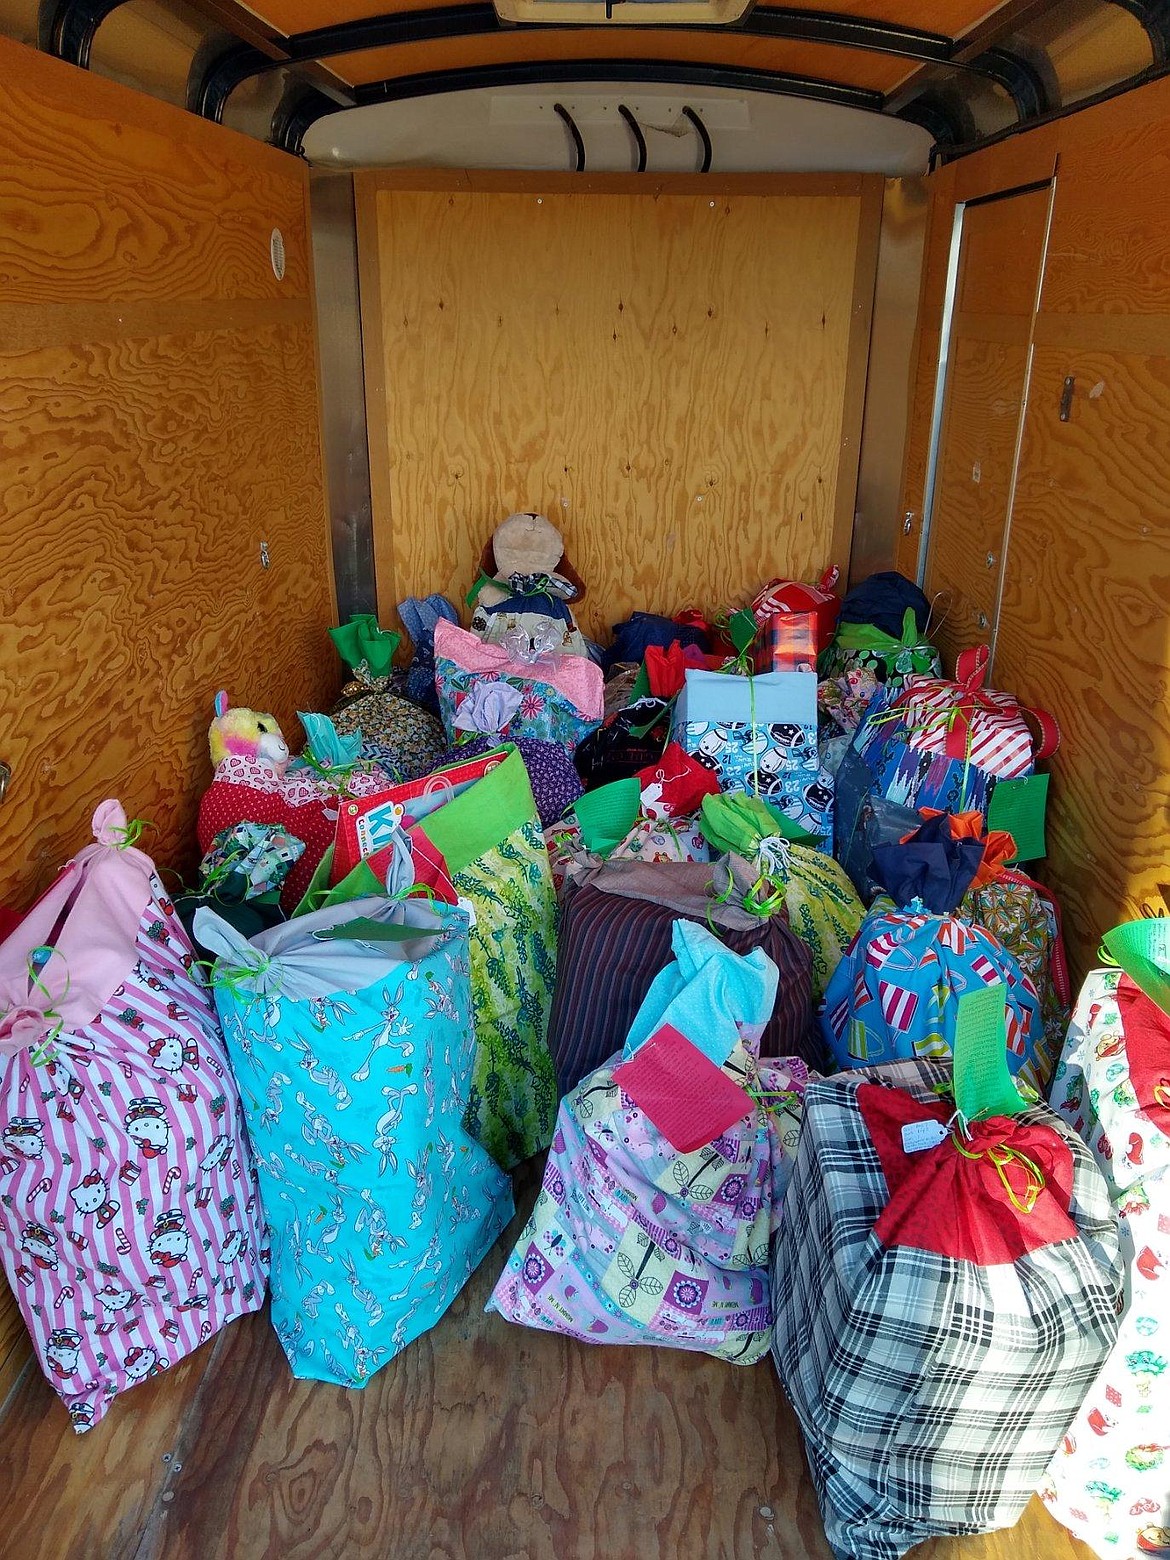 Pillowcases filled with Christmas presents for children in foster care are loaded in a trailer for delivery in December 2020.